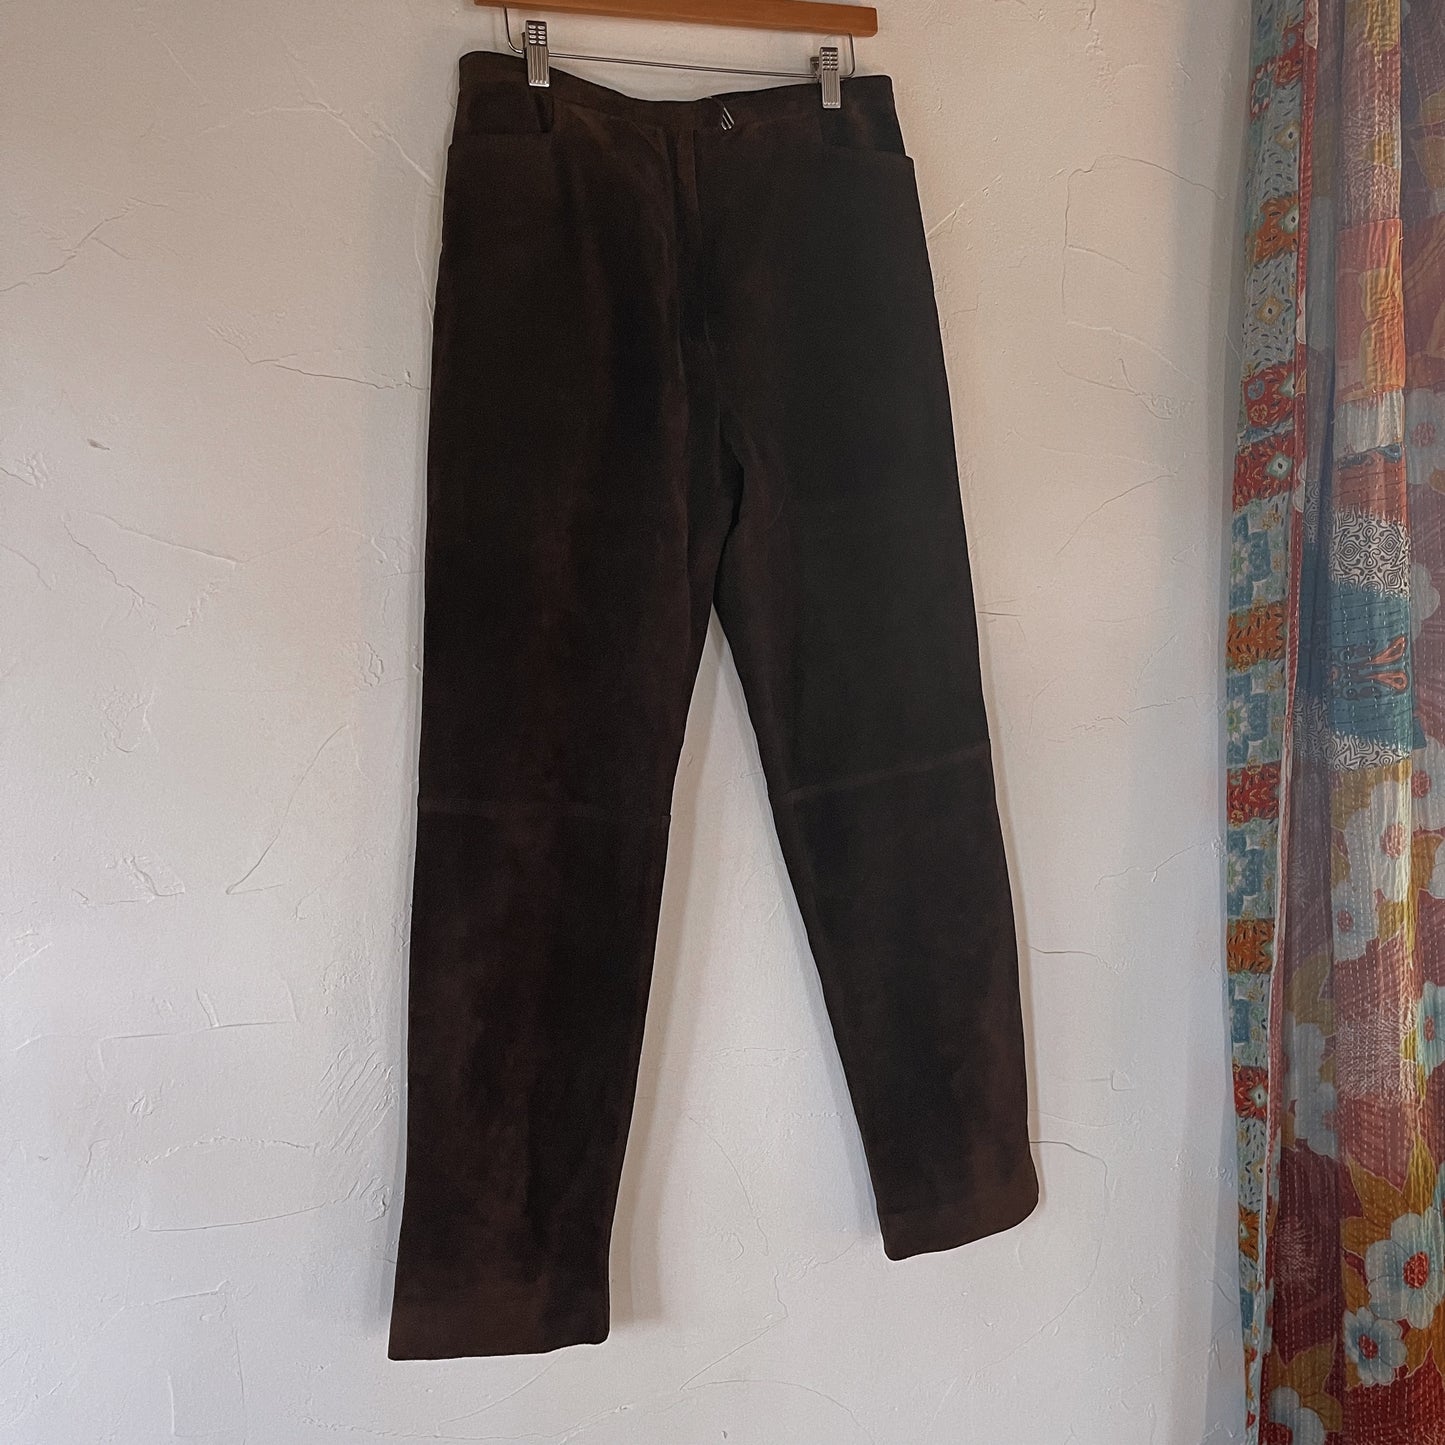 Vintage Michael Kors Suede Leather High Waisted Trouser 90’s Italian